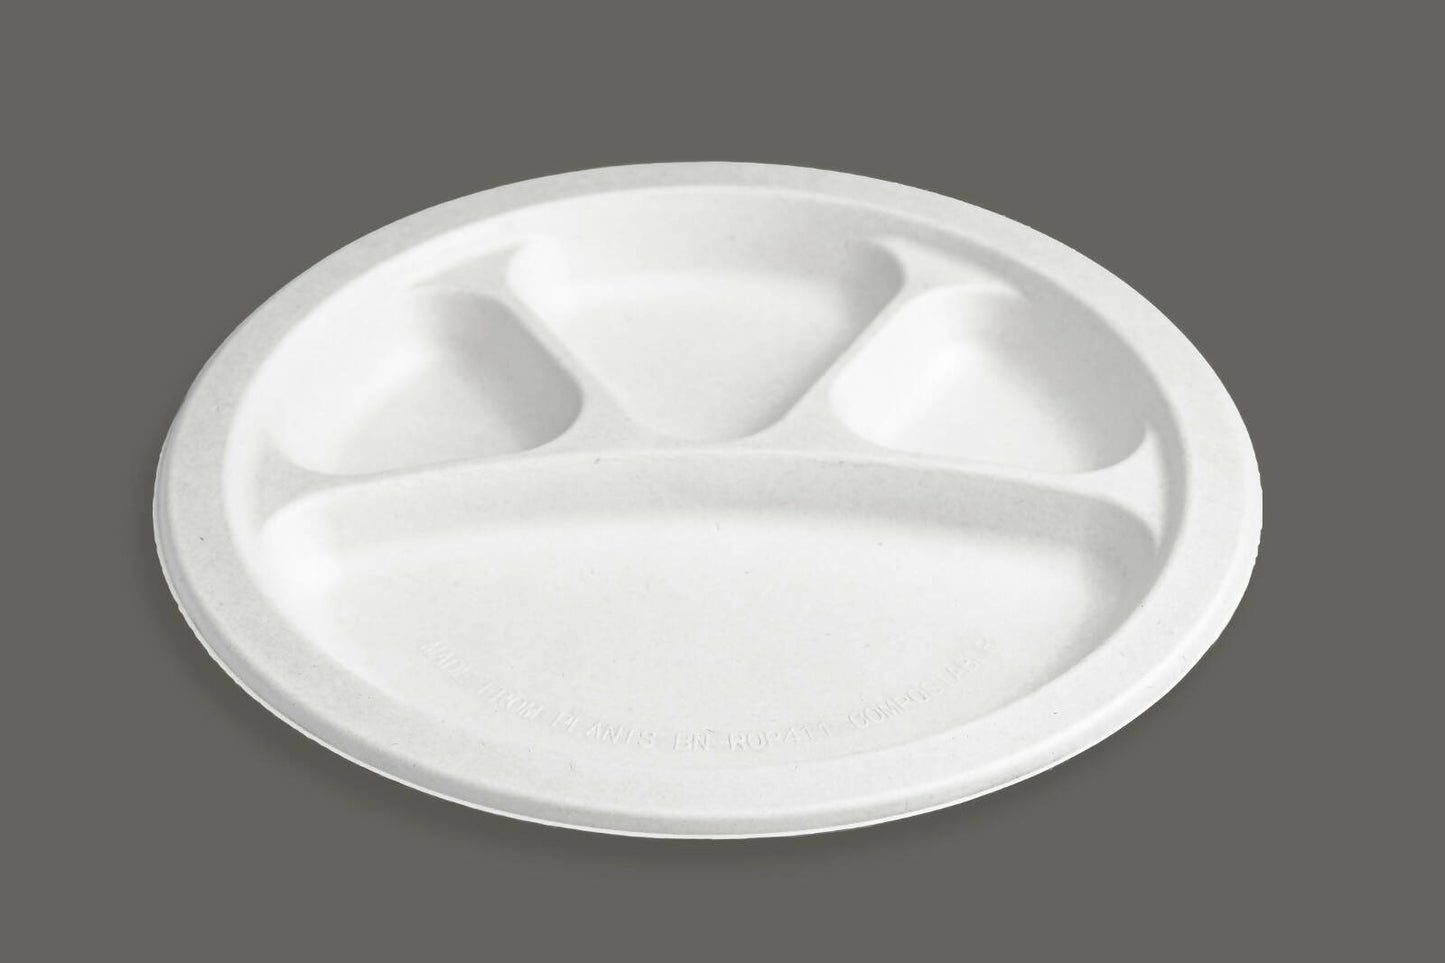 4 Compartment Plate - 12 Inch